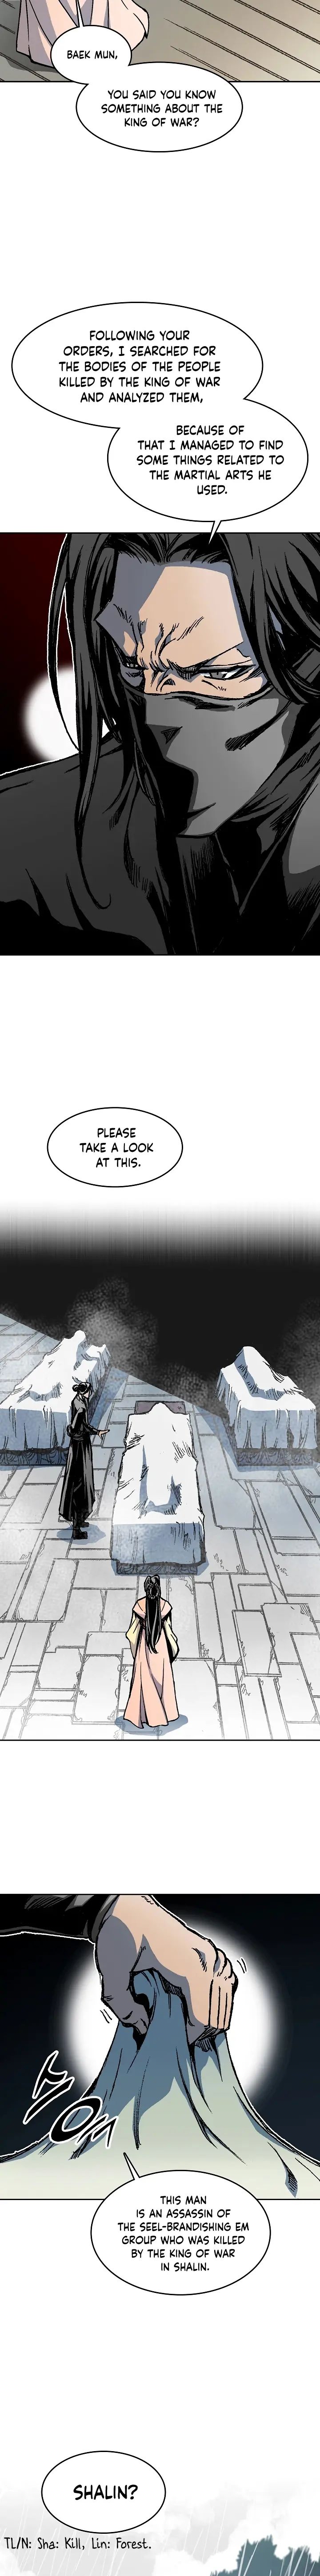 Memoir Of The God Of War Chapter 102 Page 2